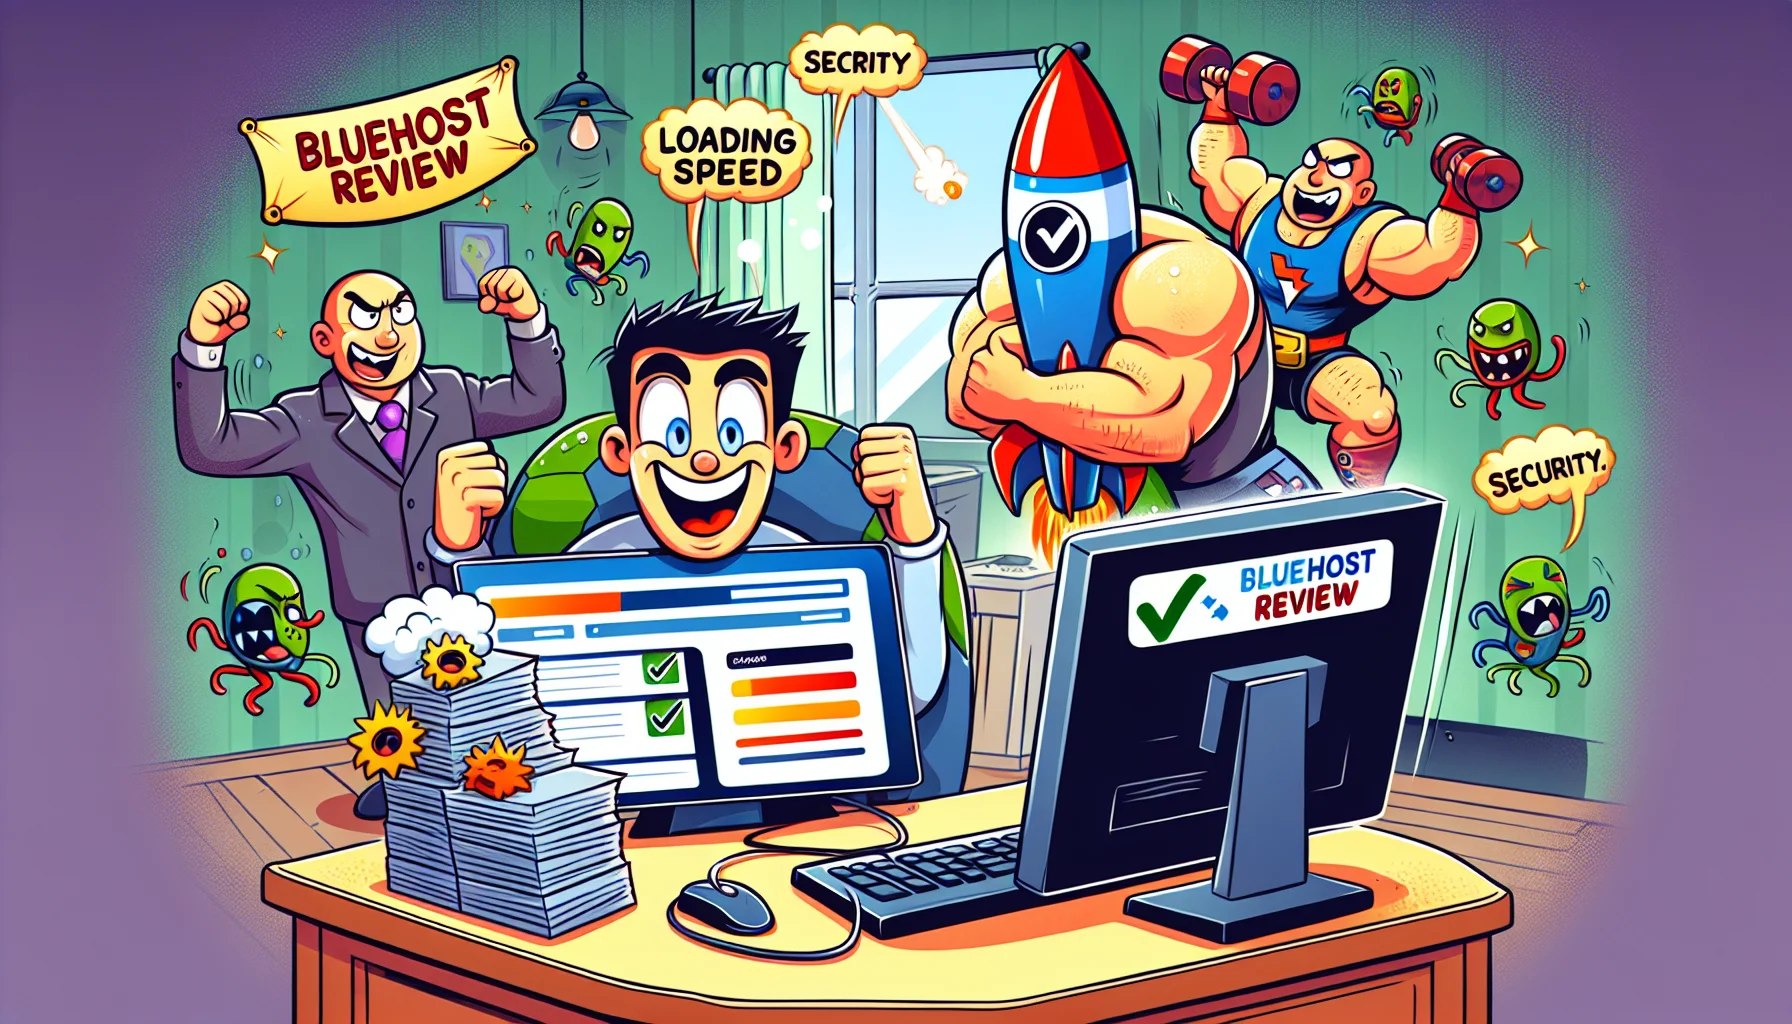 Illustrate a humorous situation that invites interest in web hosting. In the foreground, depict a cartoon-like character, who is overjoyed looking at his well-performing website on his computer in a homely setting. A big tick symbol and an approval stamp labelled 'Bluehost' can be seen on the computer screen. In the background, let's have comic elements such as a rocket labelled 'loading speed' flying past, a strongman effortlessly lifting weights labeled 'server strength', and a thick shield labelled 'security' warding off colorful, menacing viruses. A banner across the top reads 'Bluehost Review'.